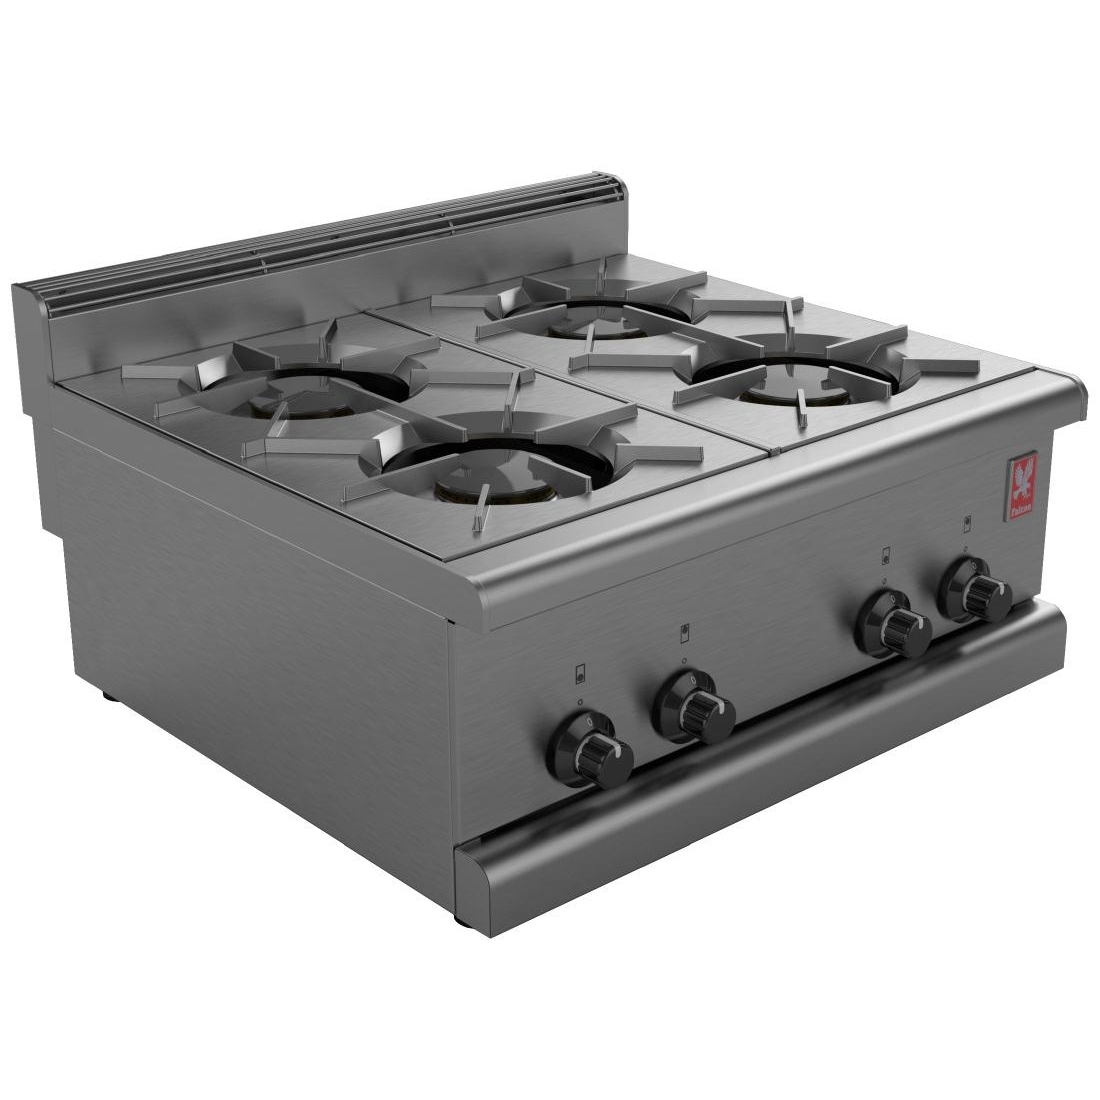 Falcon 350 Series 4 Burner Gas Boiling Top Natural Gas G350/5